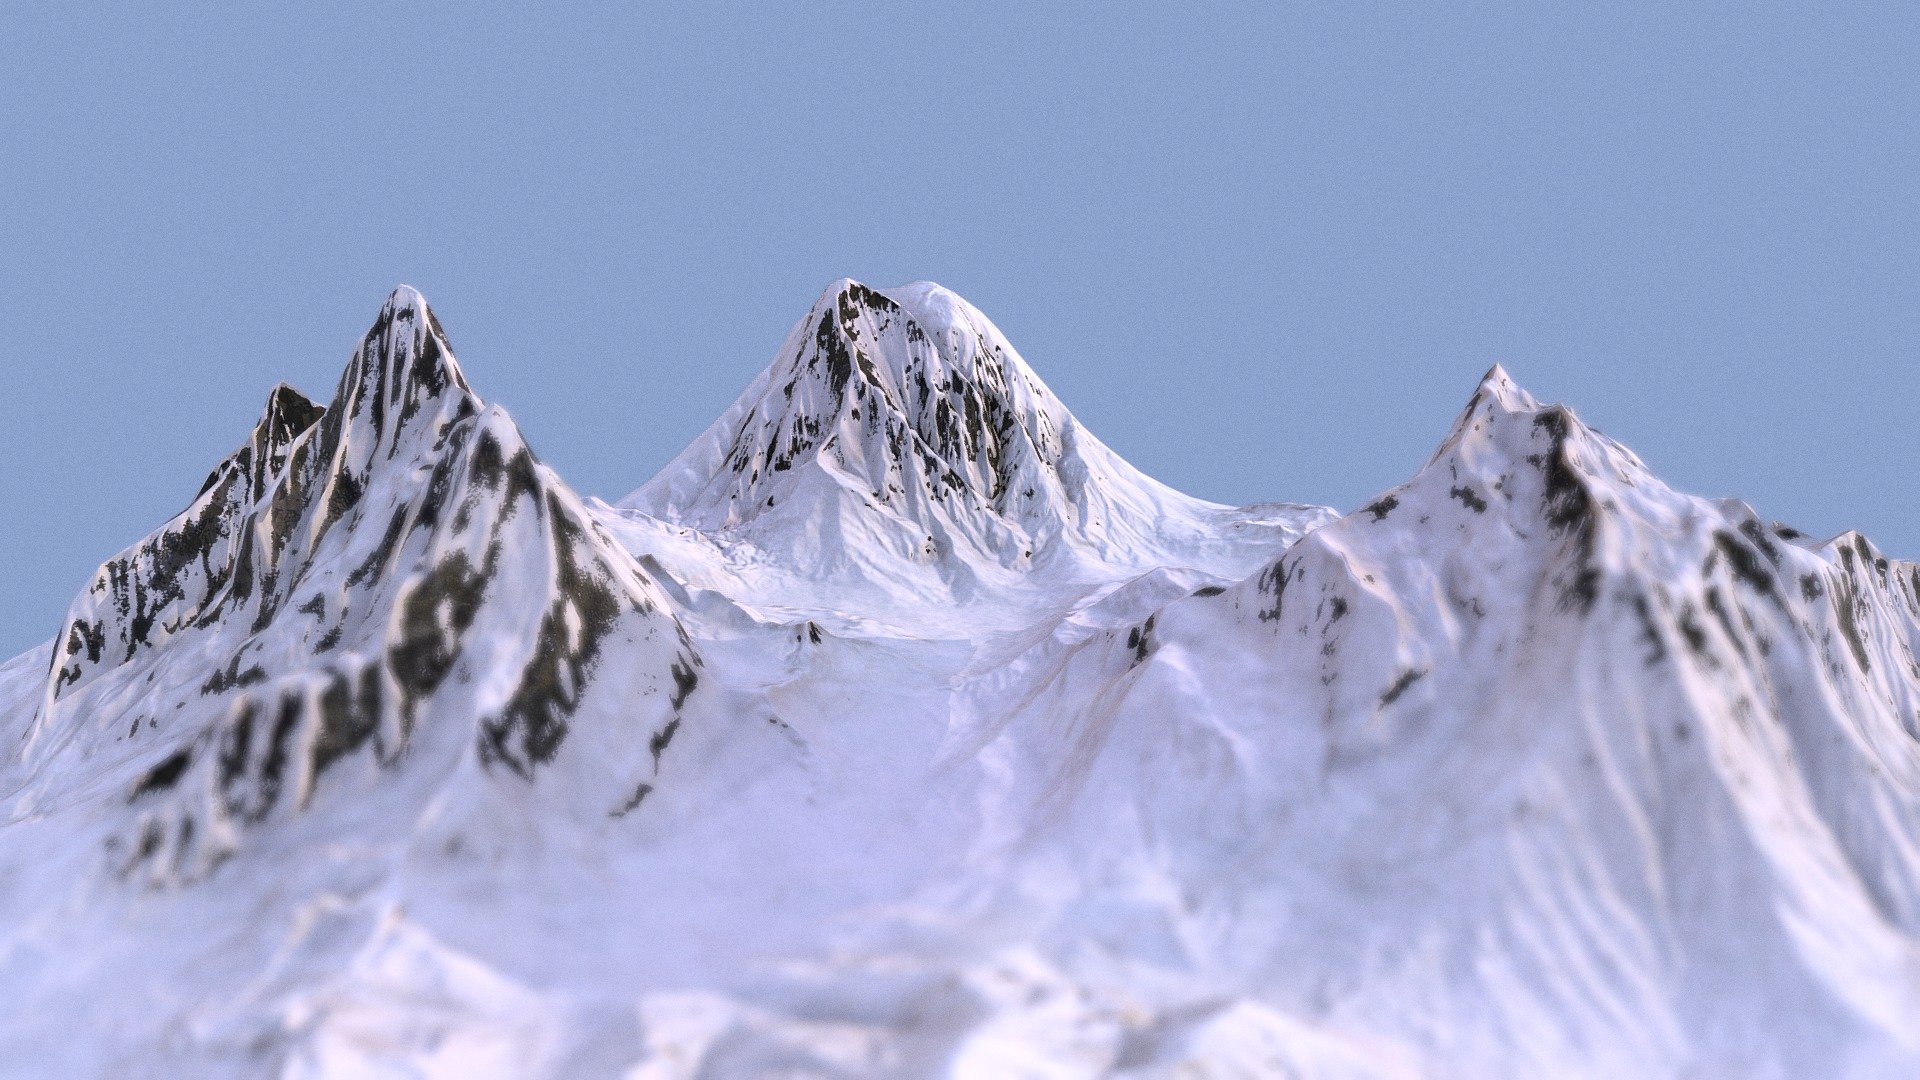 Snow valley -low poly-

Quad topology - 9.5k polygons

UV mapped with non-overlapping

All files are zipped in one folder. Contains 2 file formats obj &amp; fbx, and 4k pbr textures (Albedo, Normal, AO, Gloss &amp; Spec)

Useful for games, high resolution renders and other graphical projects 3d model